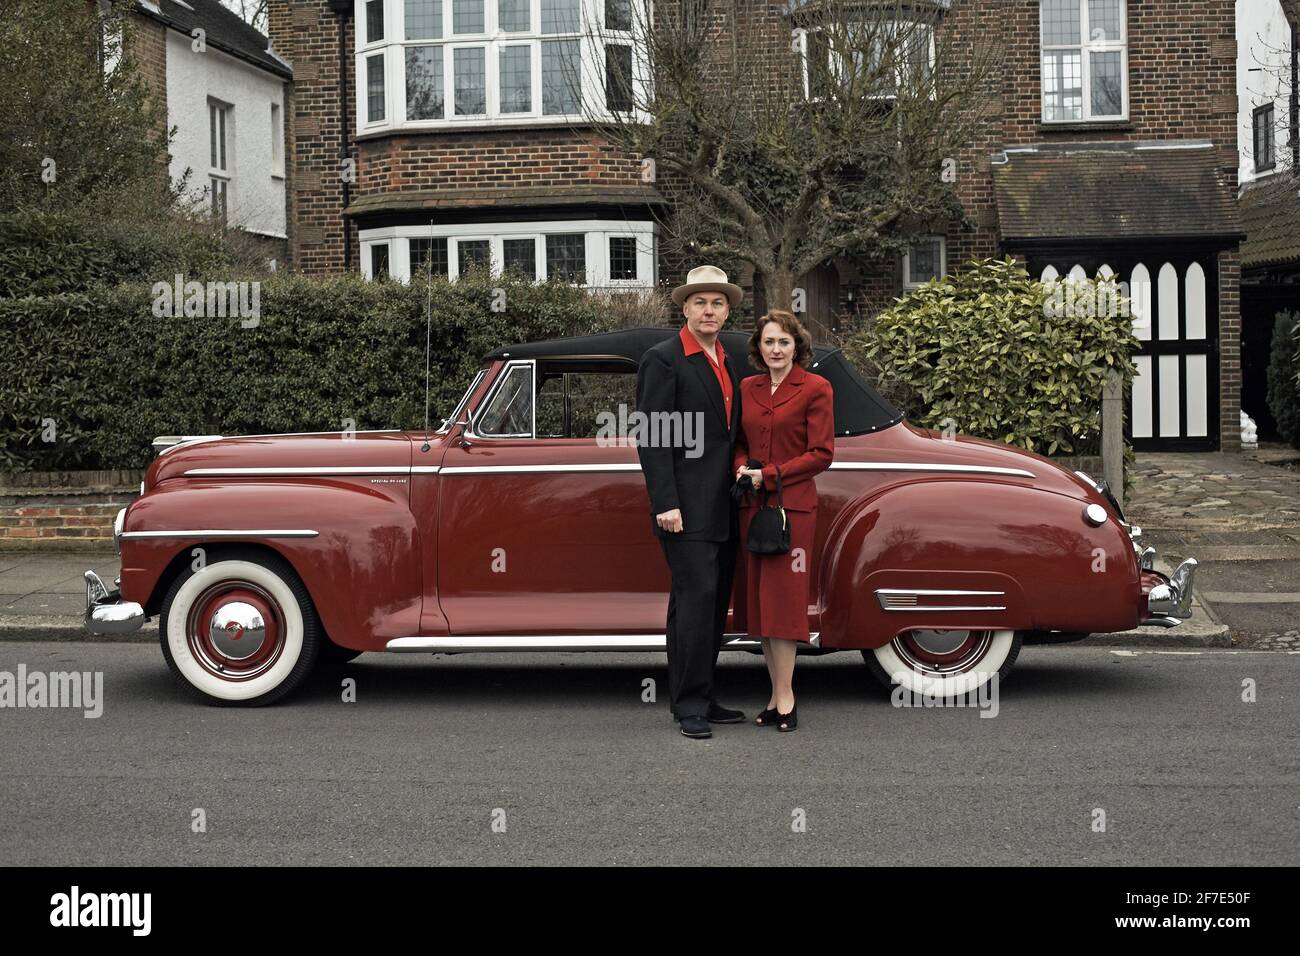 GROSSBRITANNIEN / England/ Paar in 1940s Outfits im 1947 Plymouth Cabrio, London 2013. Stockfoto